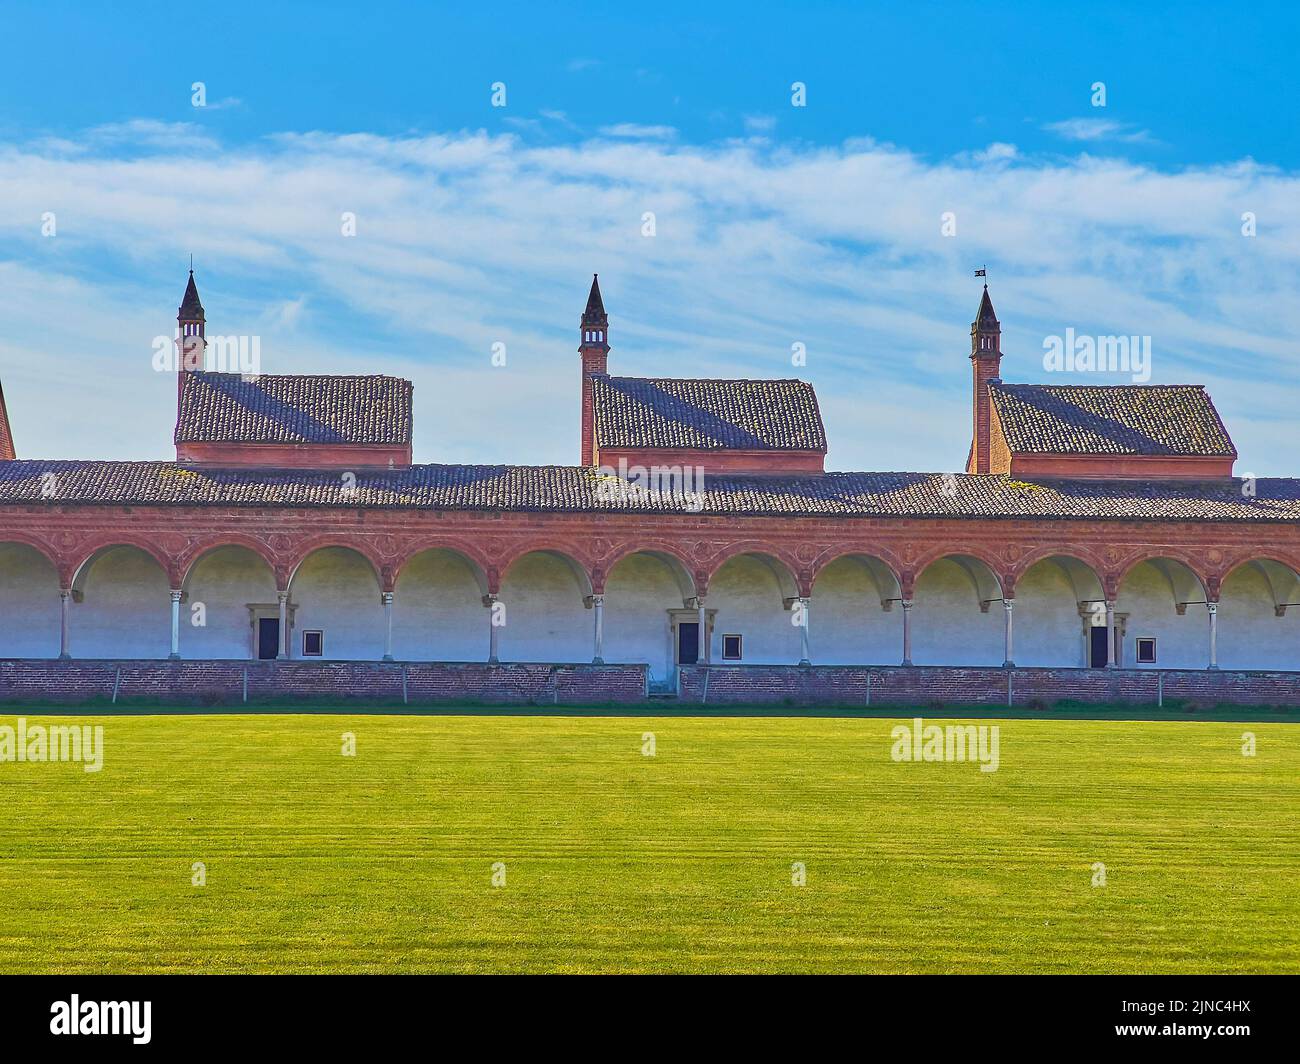 The monk's cells and the covered gallery of Grand Cloister of Certosa di Pavia monastery, Italy Stock Photo